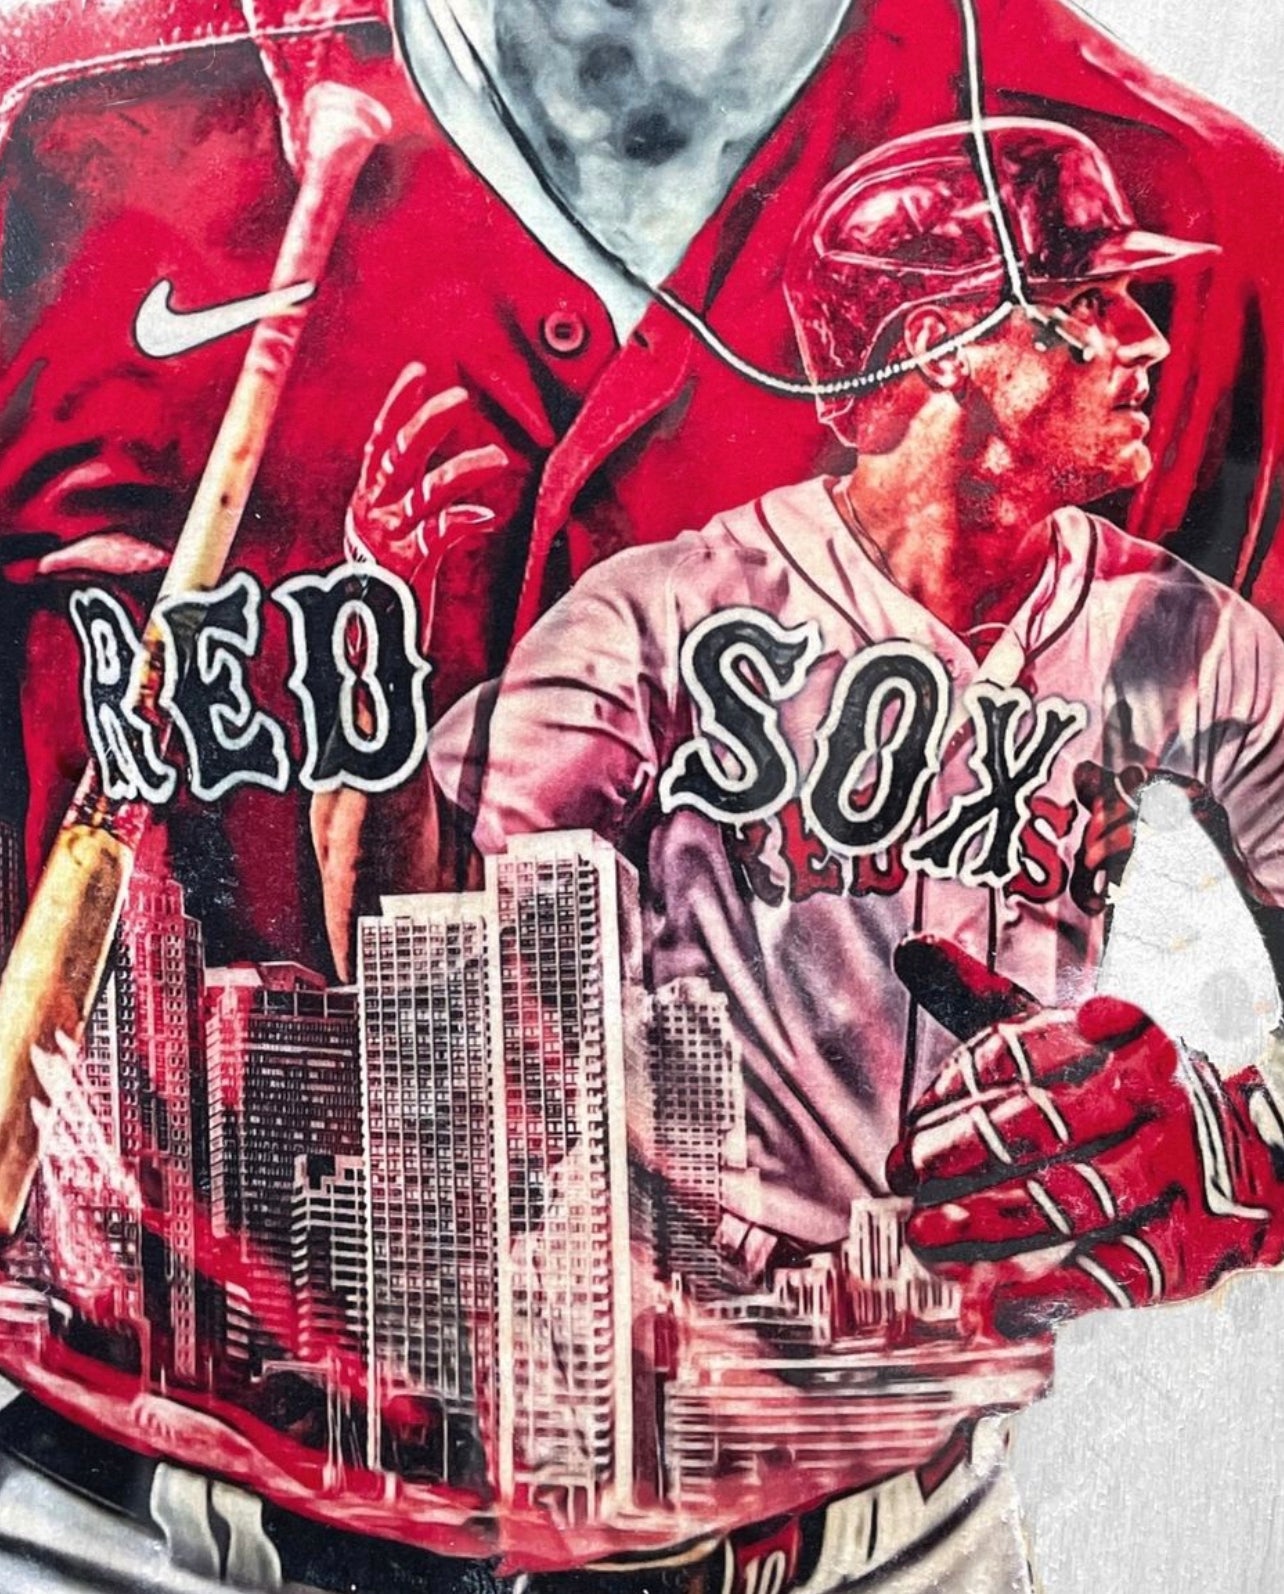 "Froe" (Hunter Renfroe) Boston Red Sox - Officially Licensed MLB Print - /500 Limited Release